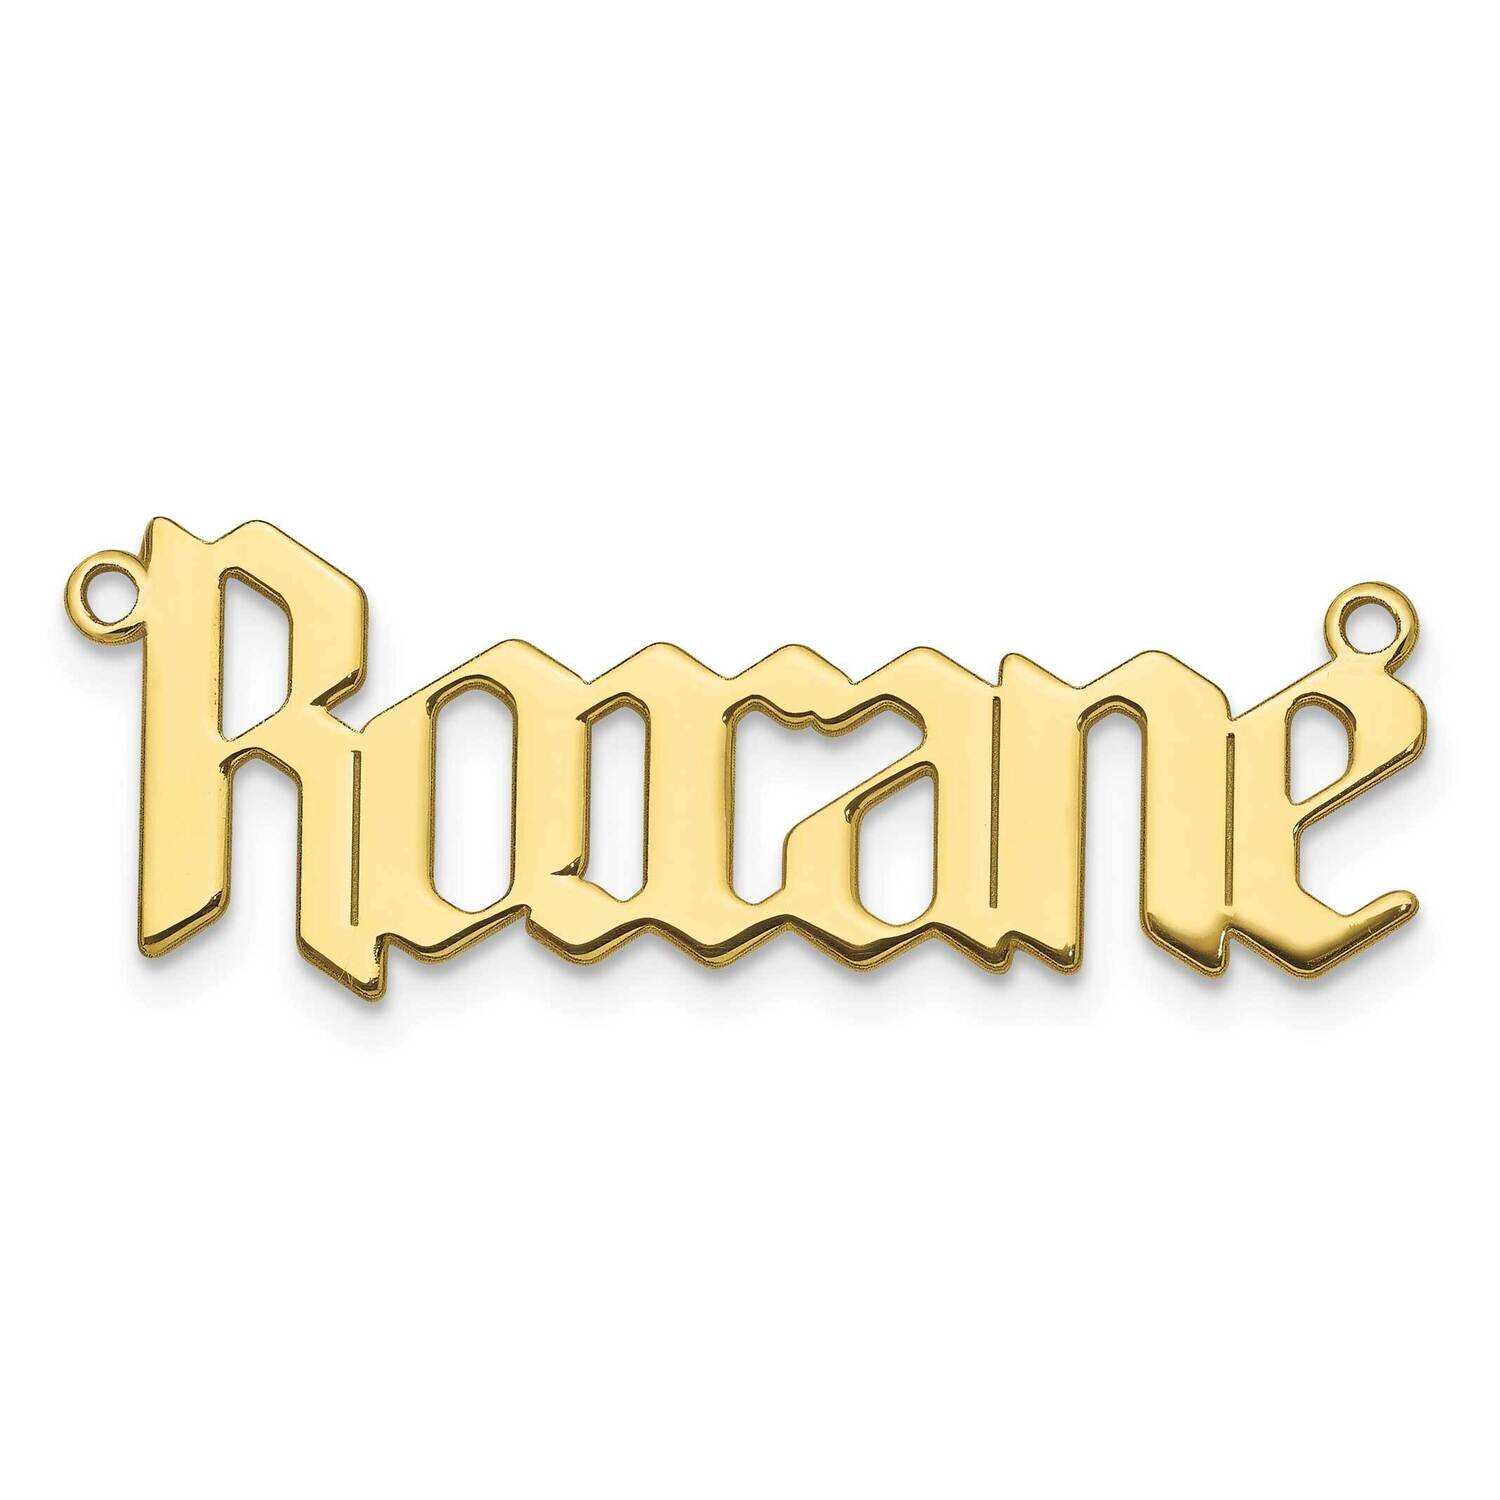 New Gothic Textura Font Name Plate 10k Gold Polished 10XNA1298Y